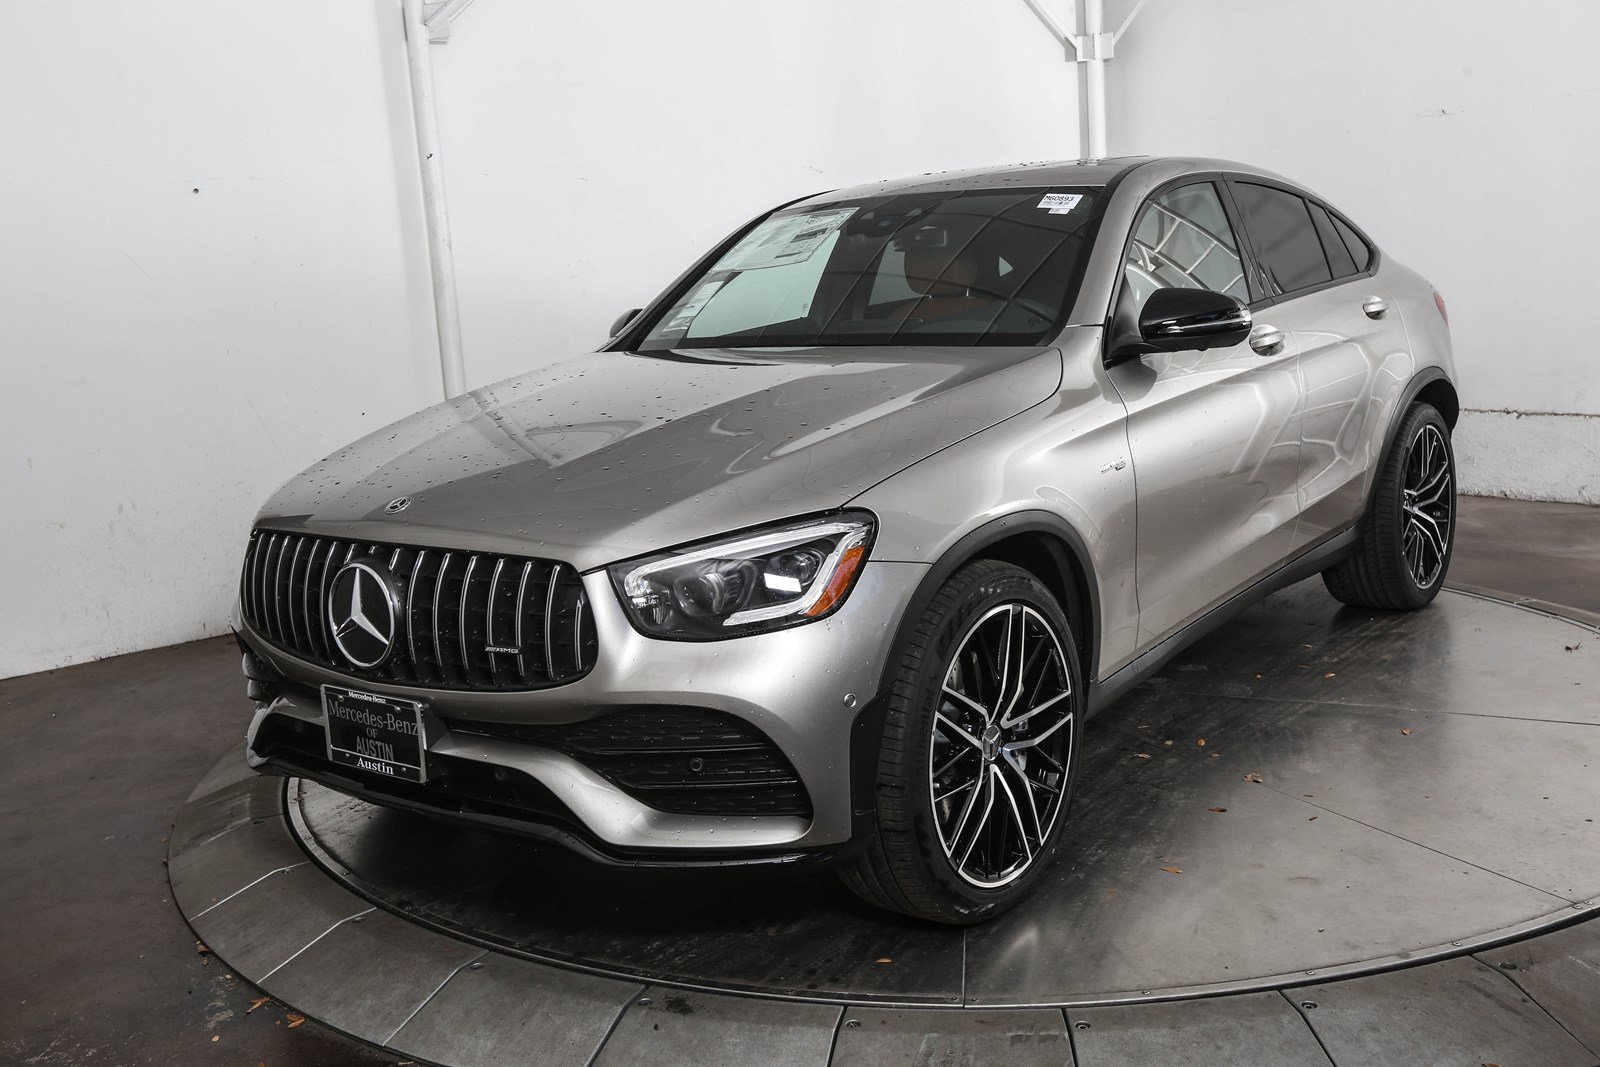 New 2020 Mercedes Benz GLC AMG 174 GLC 43 4MATIC 174 Coupe Coupe in Austin 